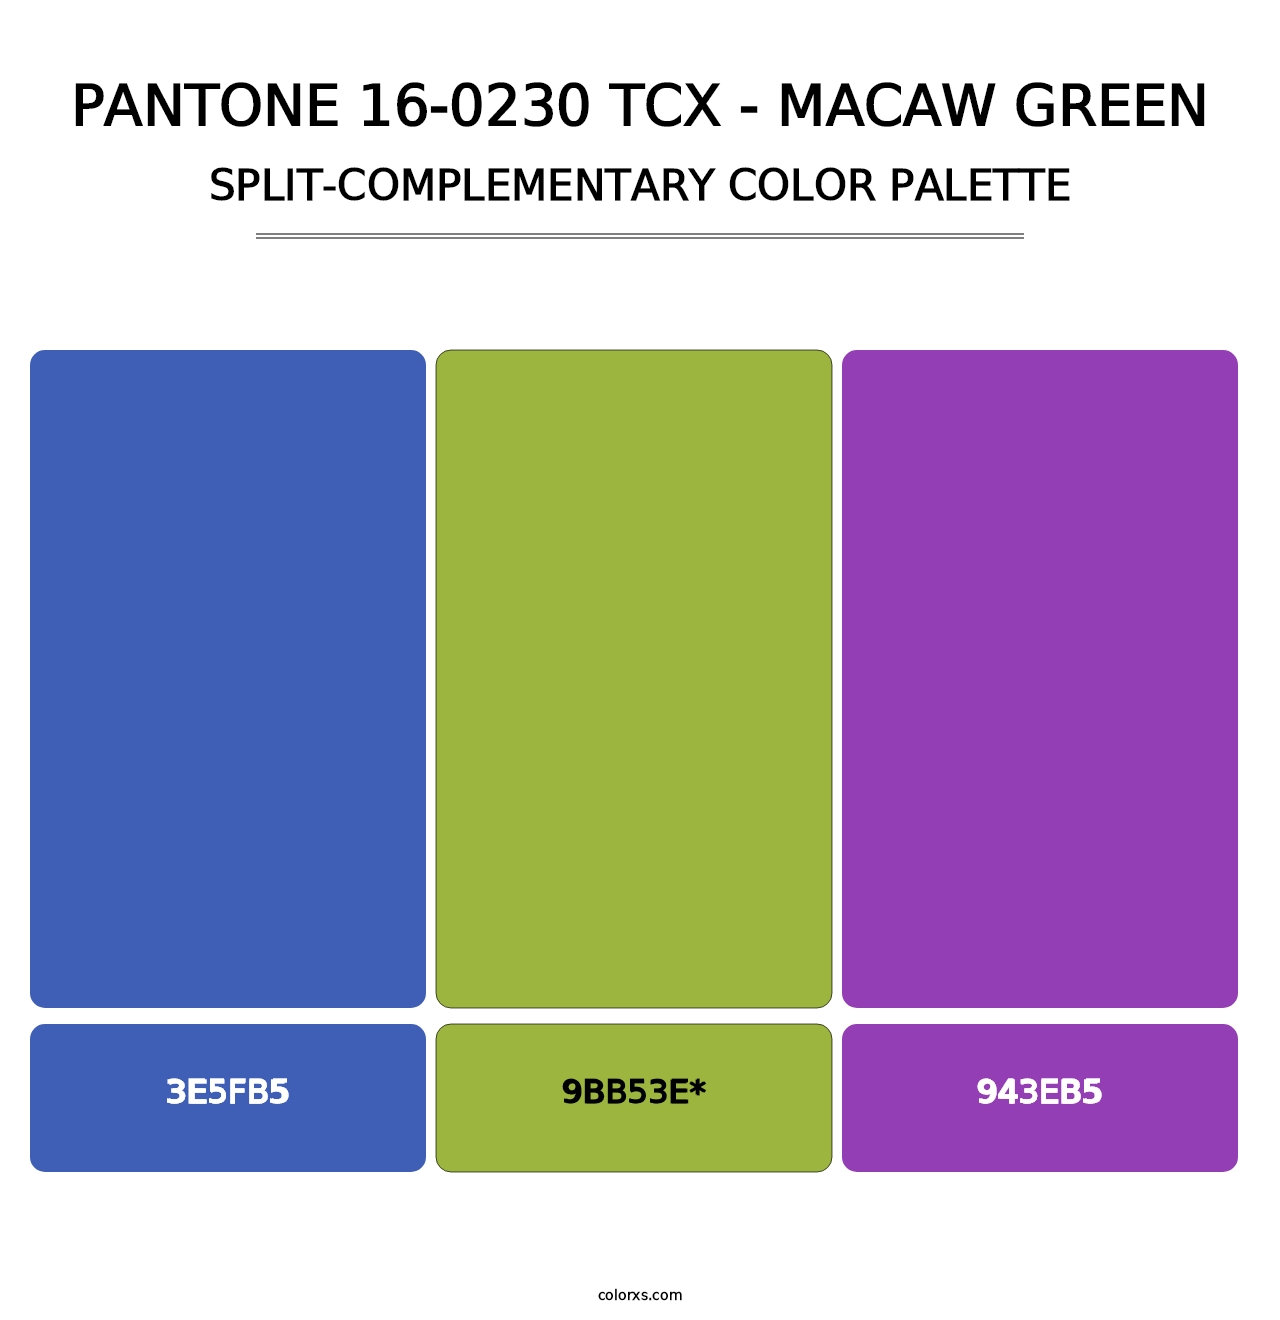 PANTONE 16-0230 TCX - Macaw Green - Split-Complementary Color Palette